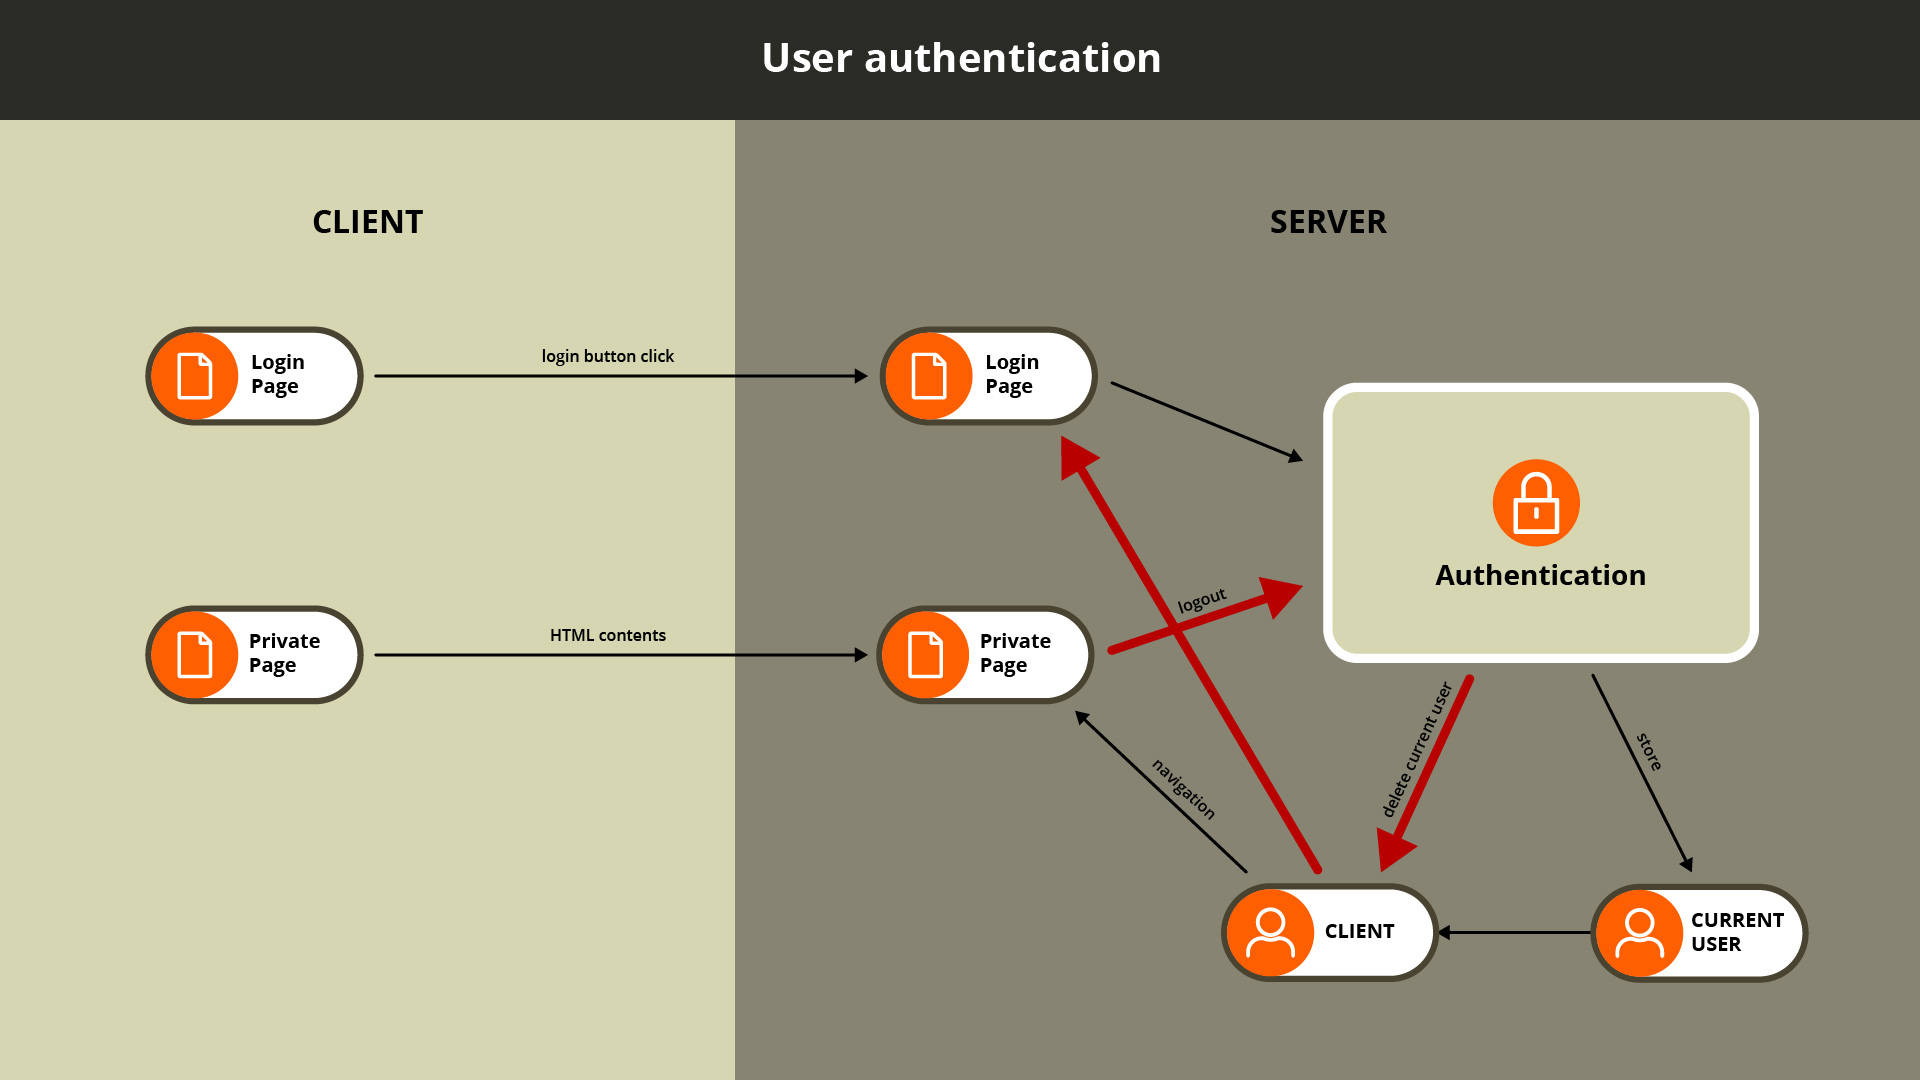 user authentication